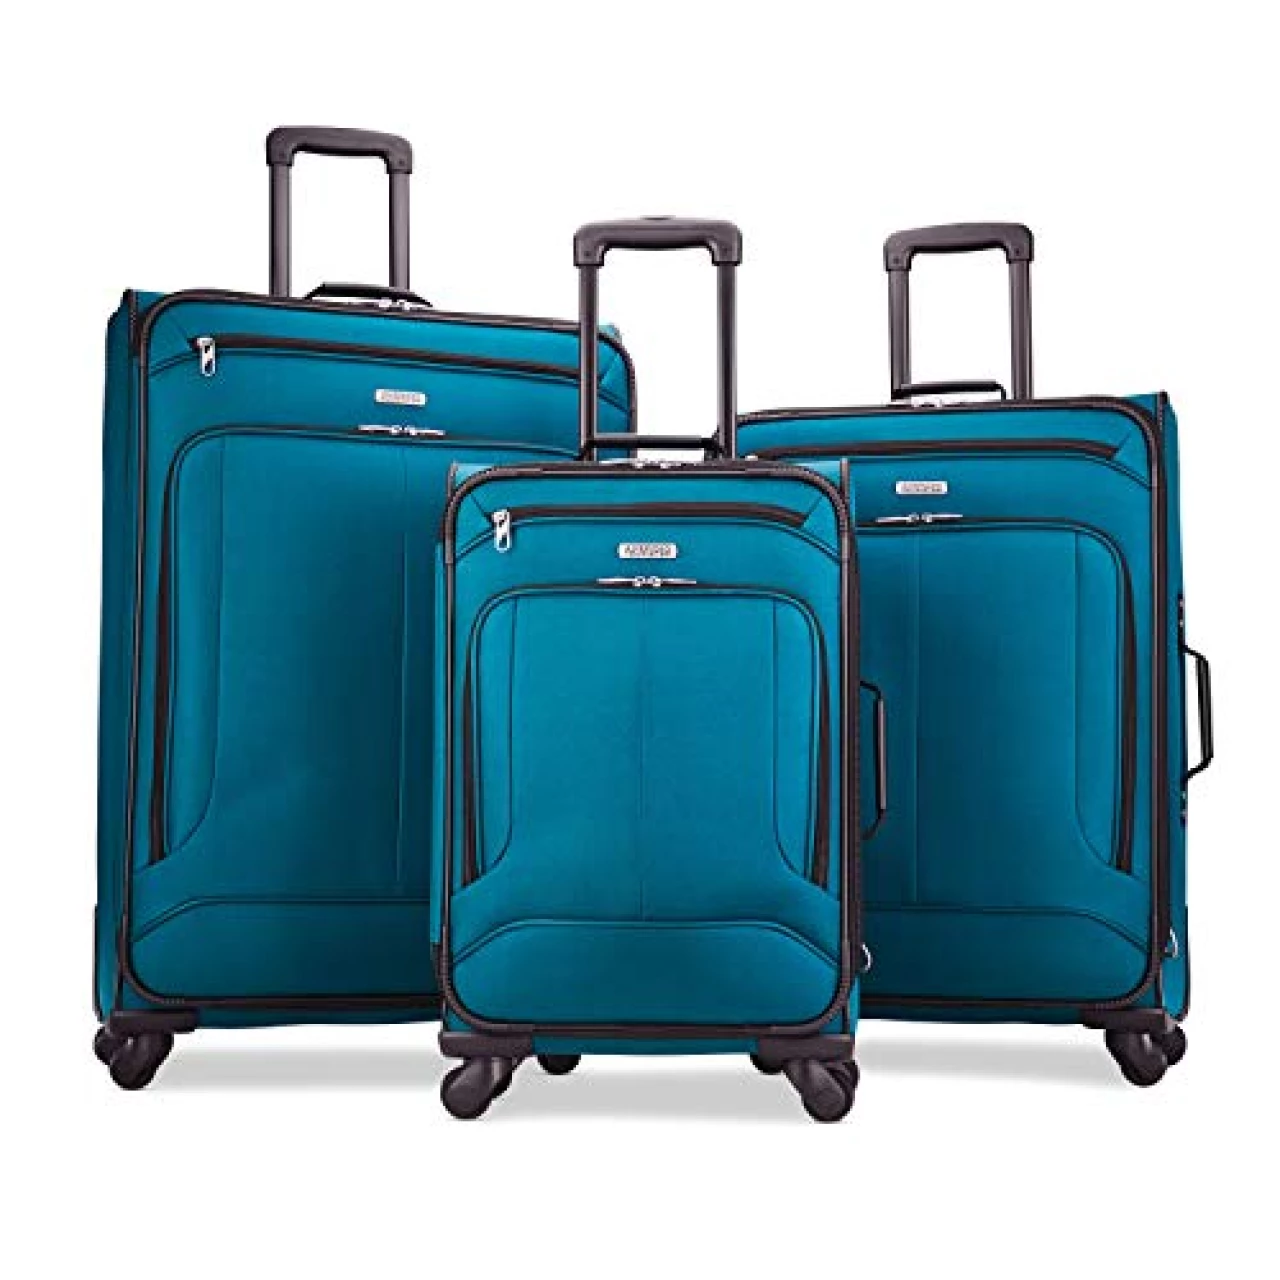 American Tourister Pop Max Softside Luggage with Spinner Wheels, Teal, 3-Piece Set